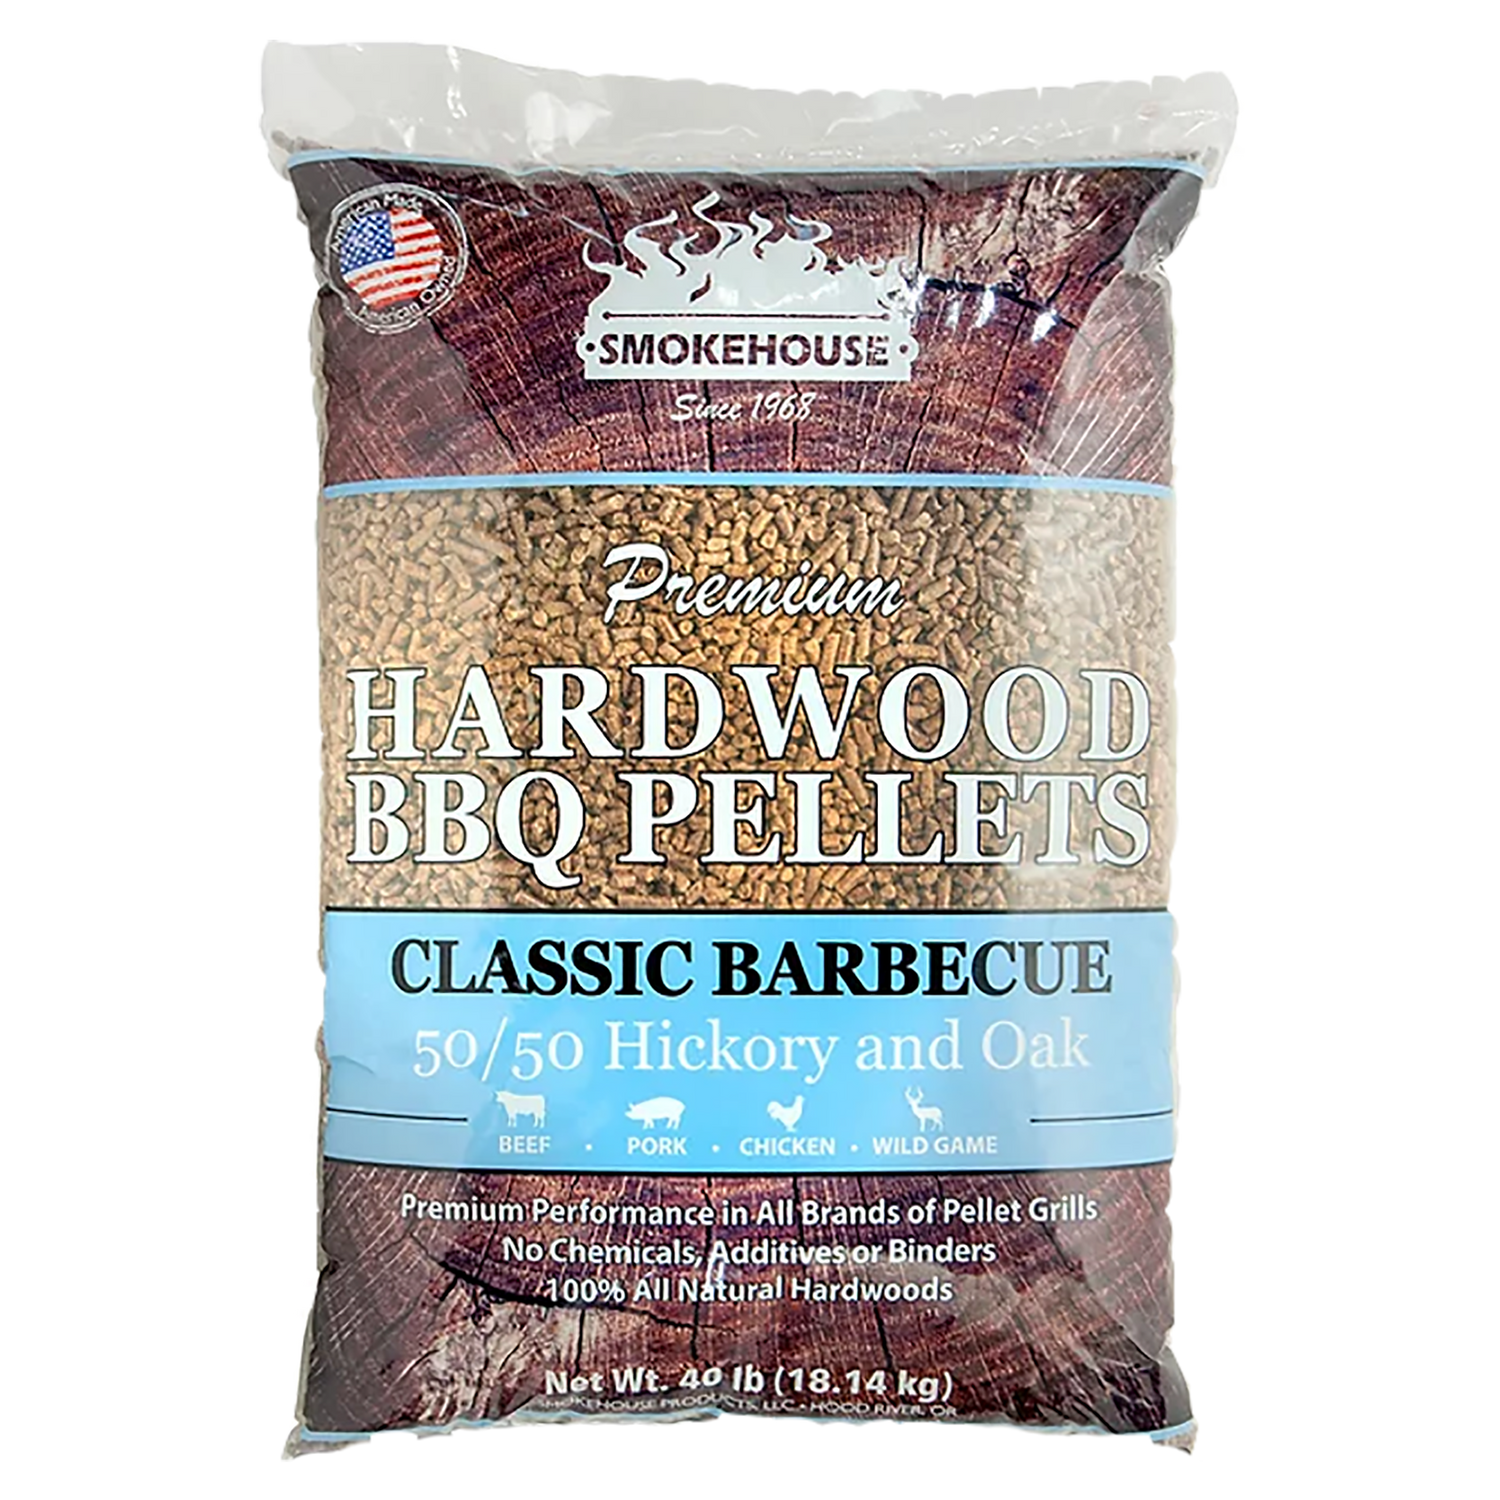 Smokehouse Classic Barbecue BBQ Pellets